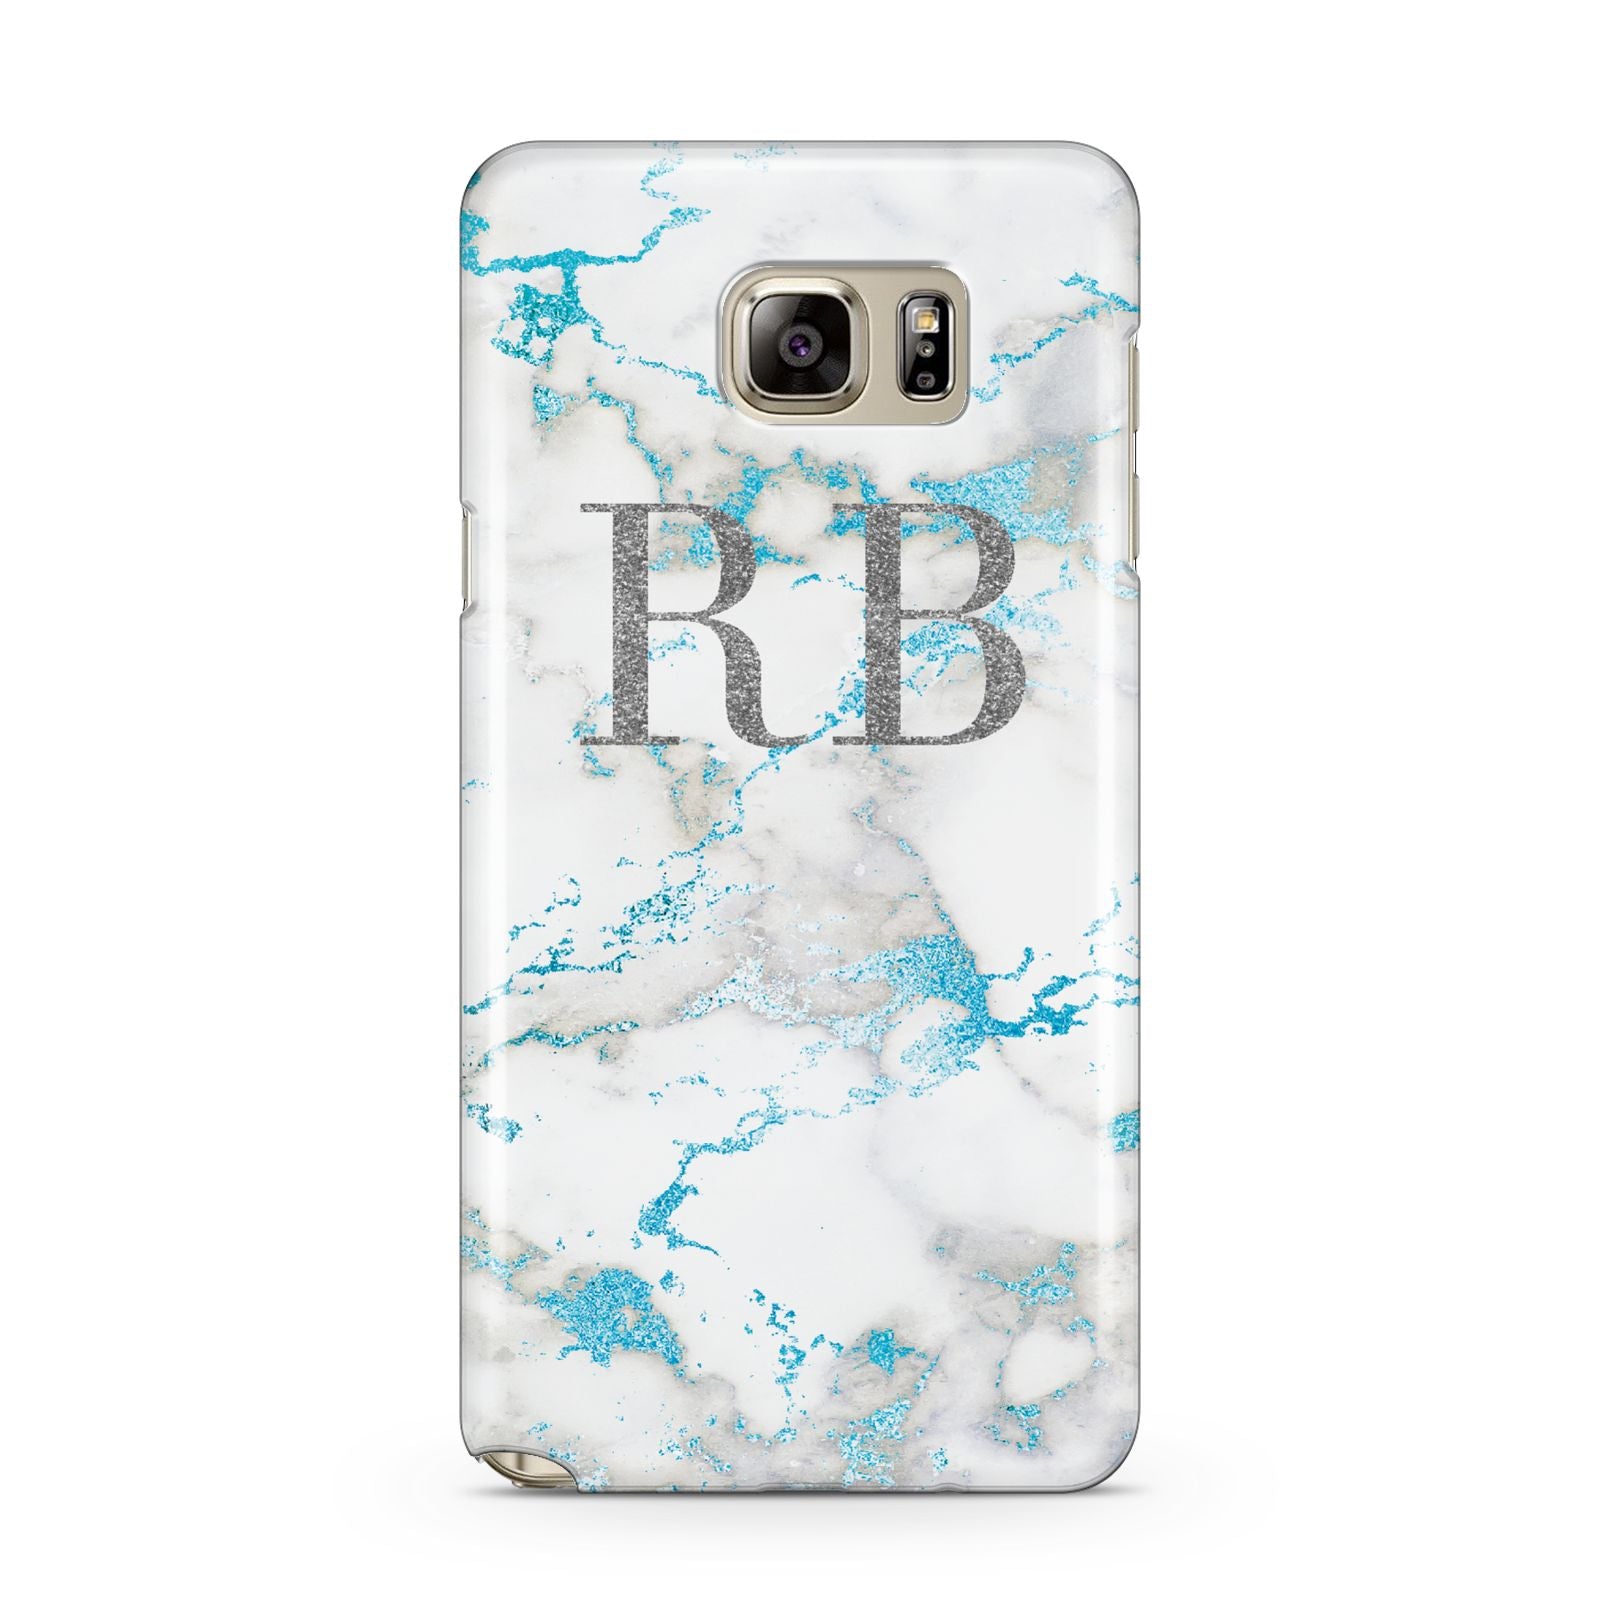 Personalised Blue Marble Initials Samsung Galaxy Note 5 Case